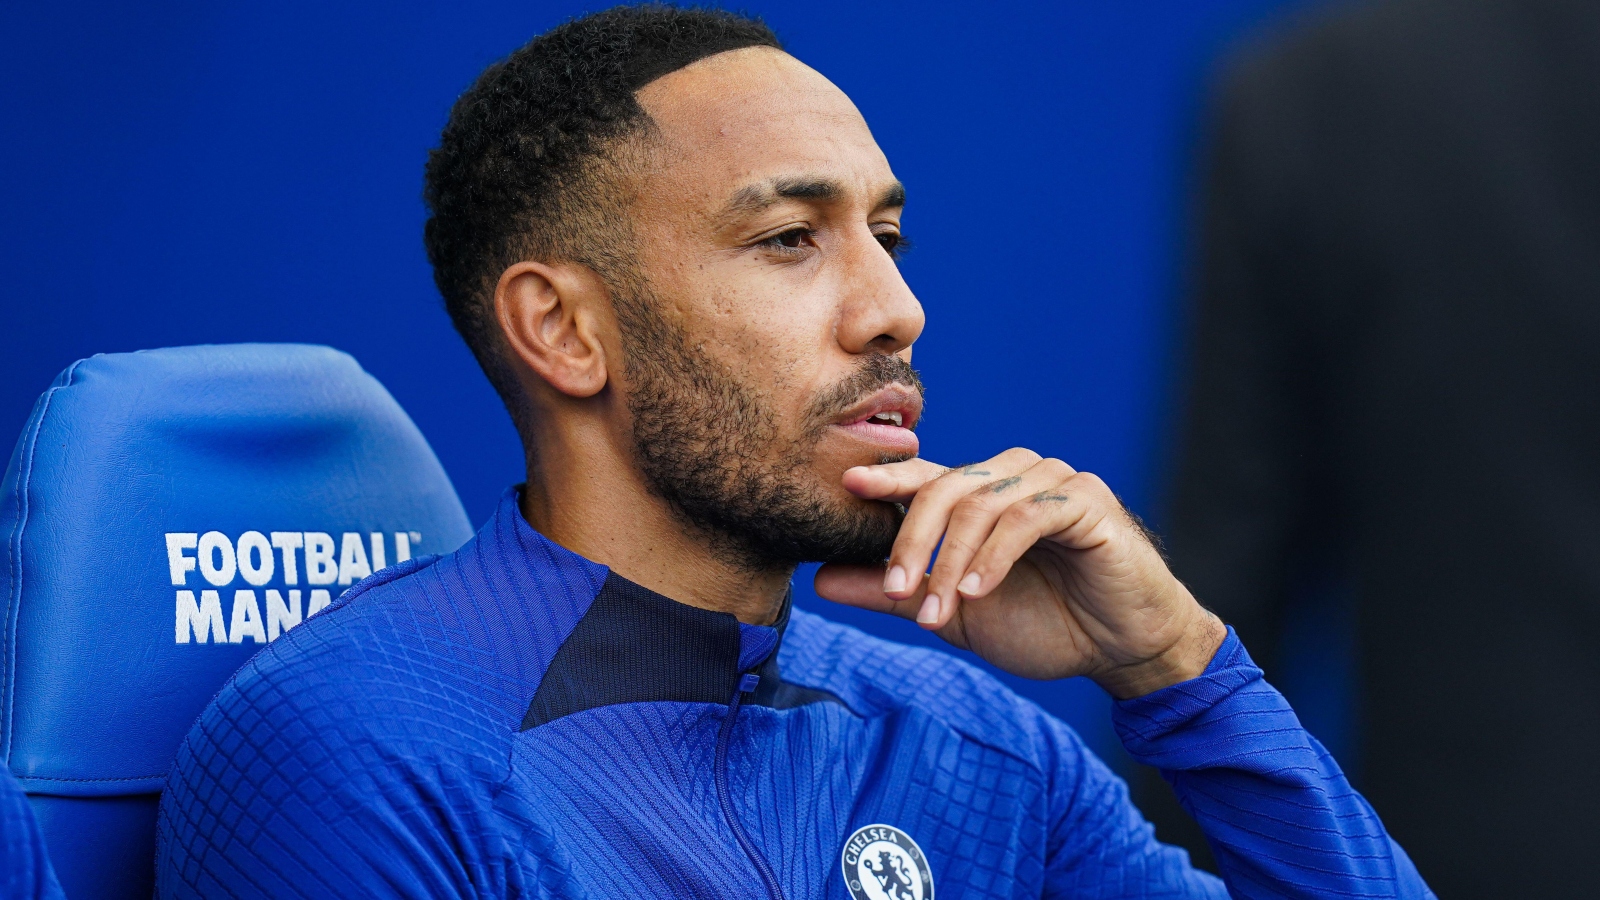 Chelsea considering to terminate Aubameyang’s contract